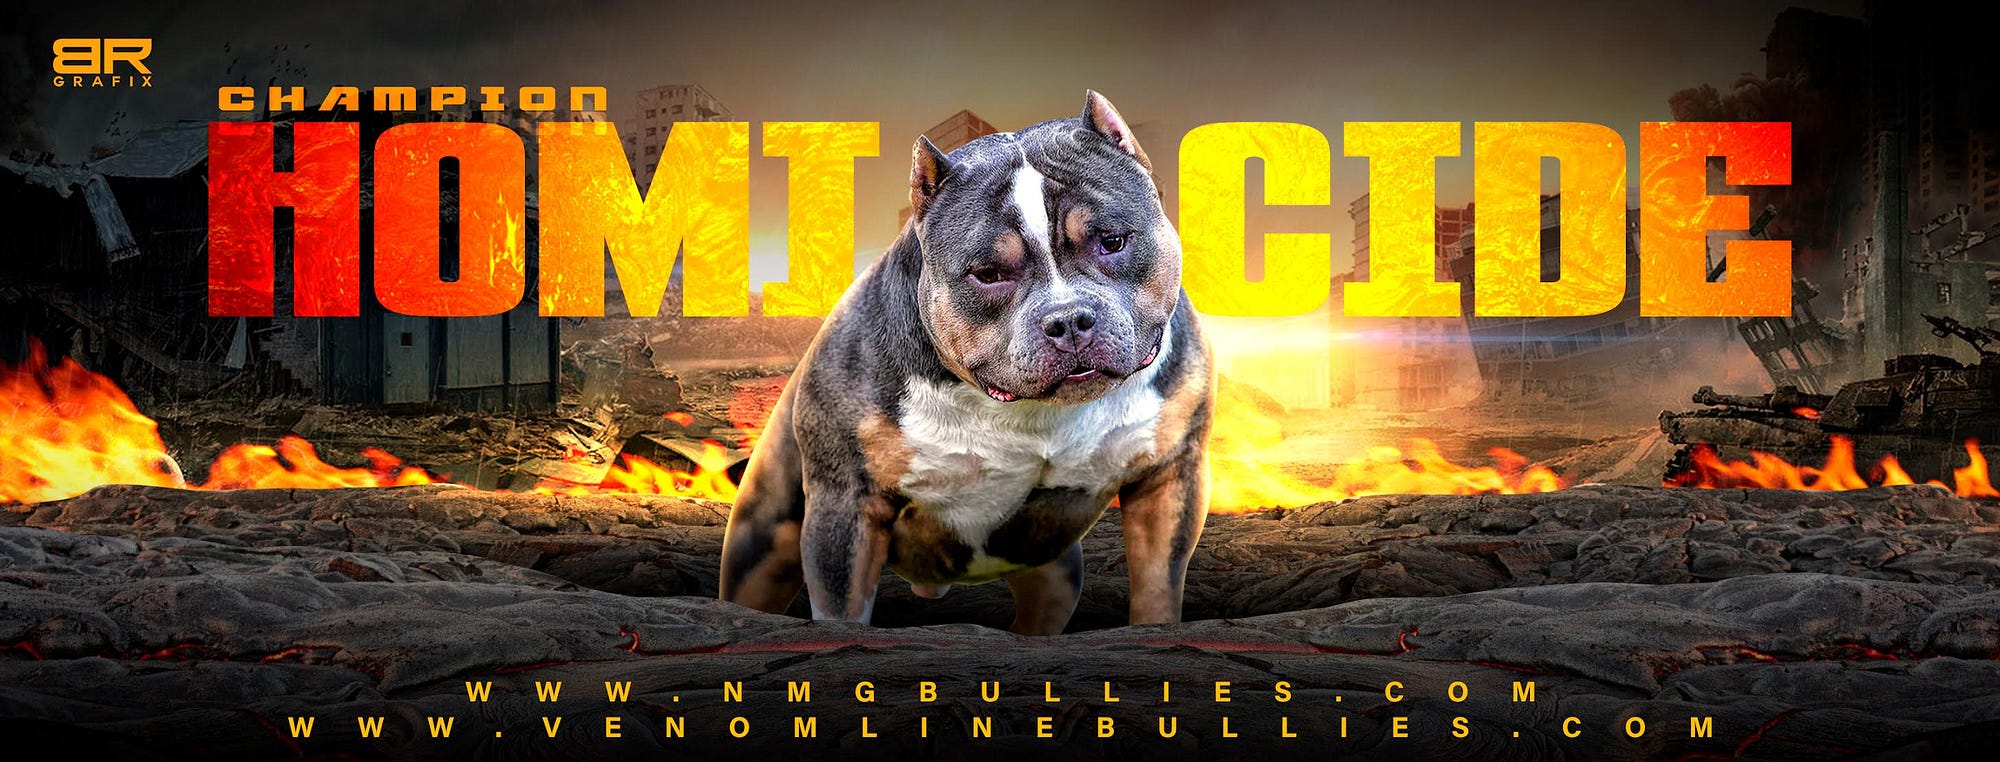 American Bully Breed: A Comprehensive Guide, by MyPetGuides